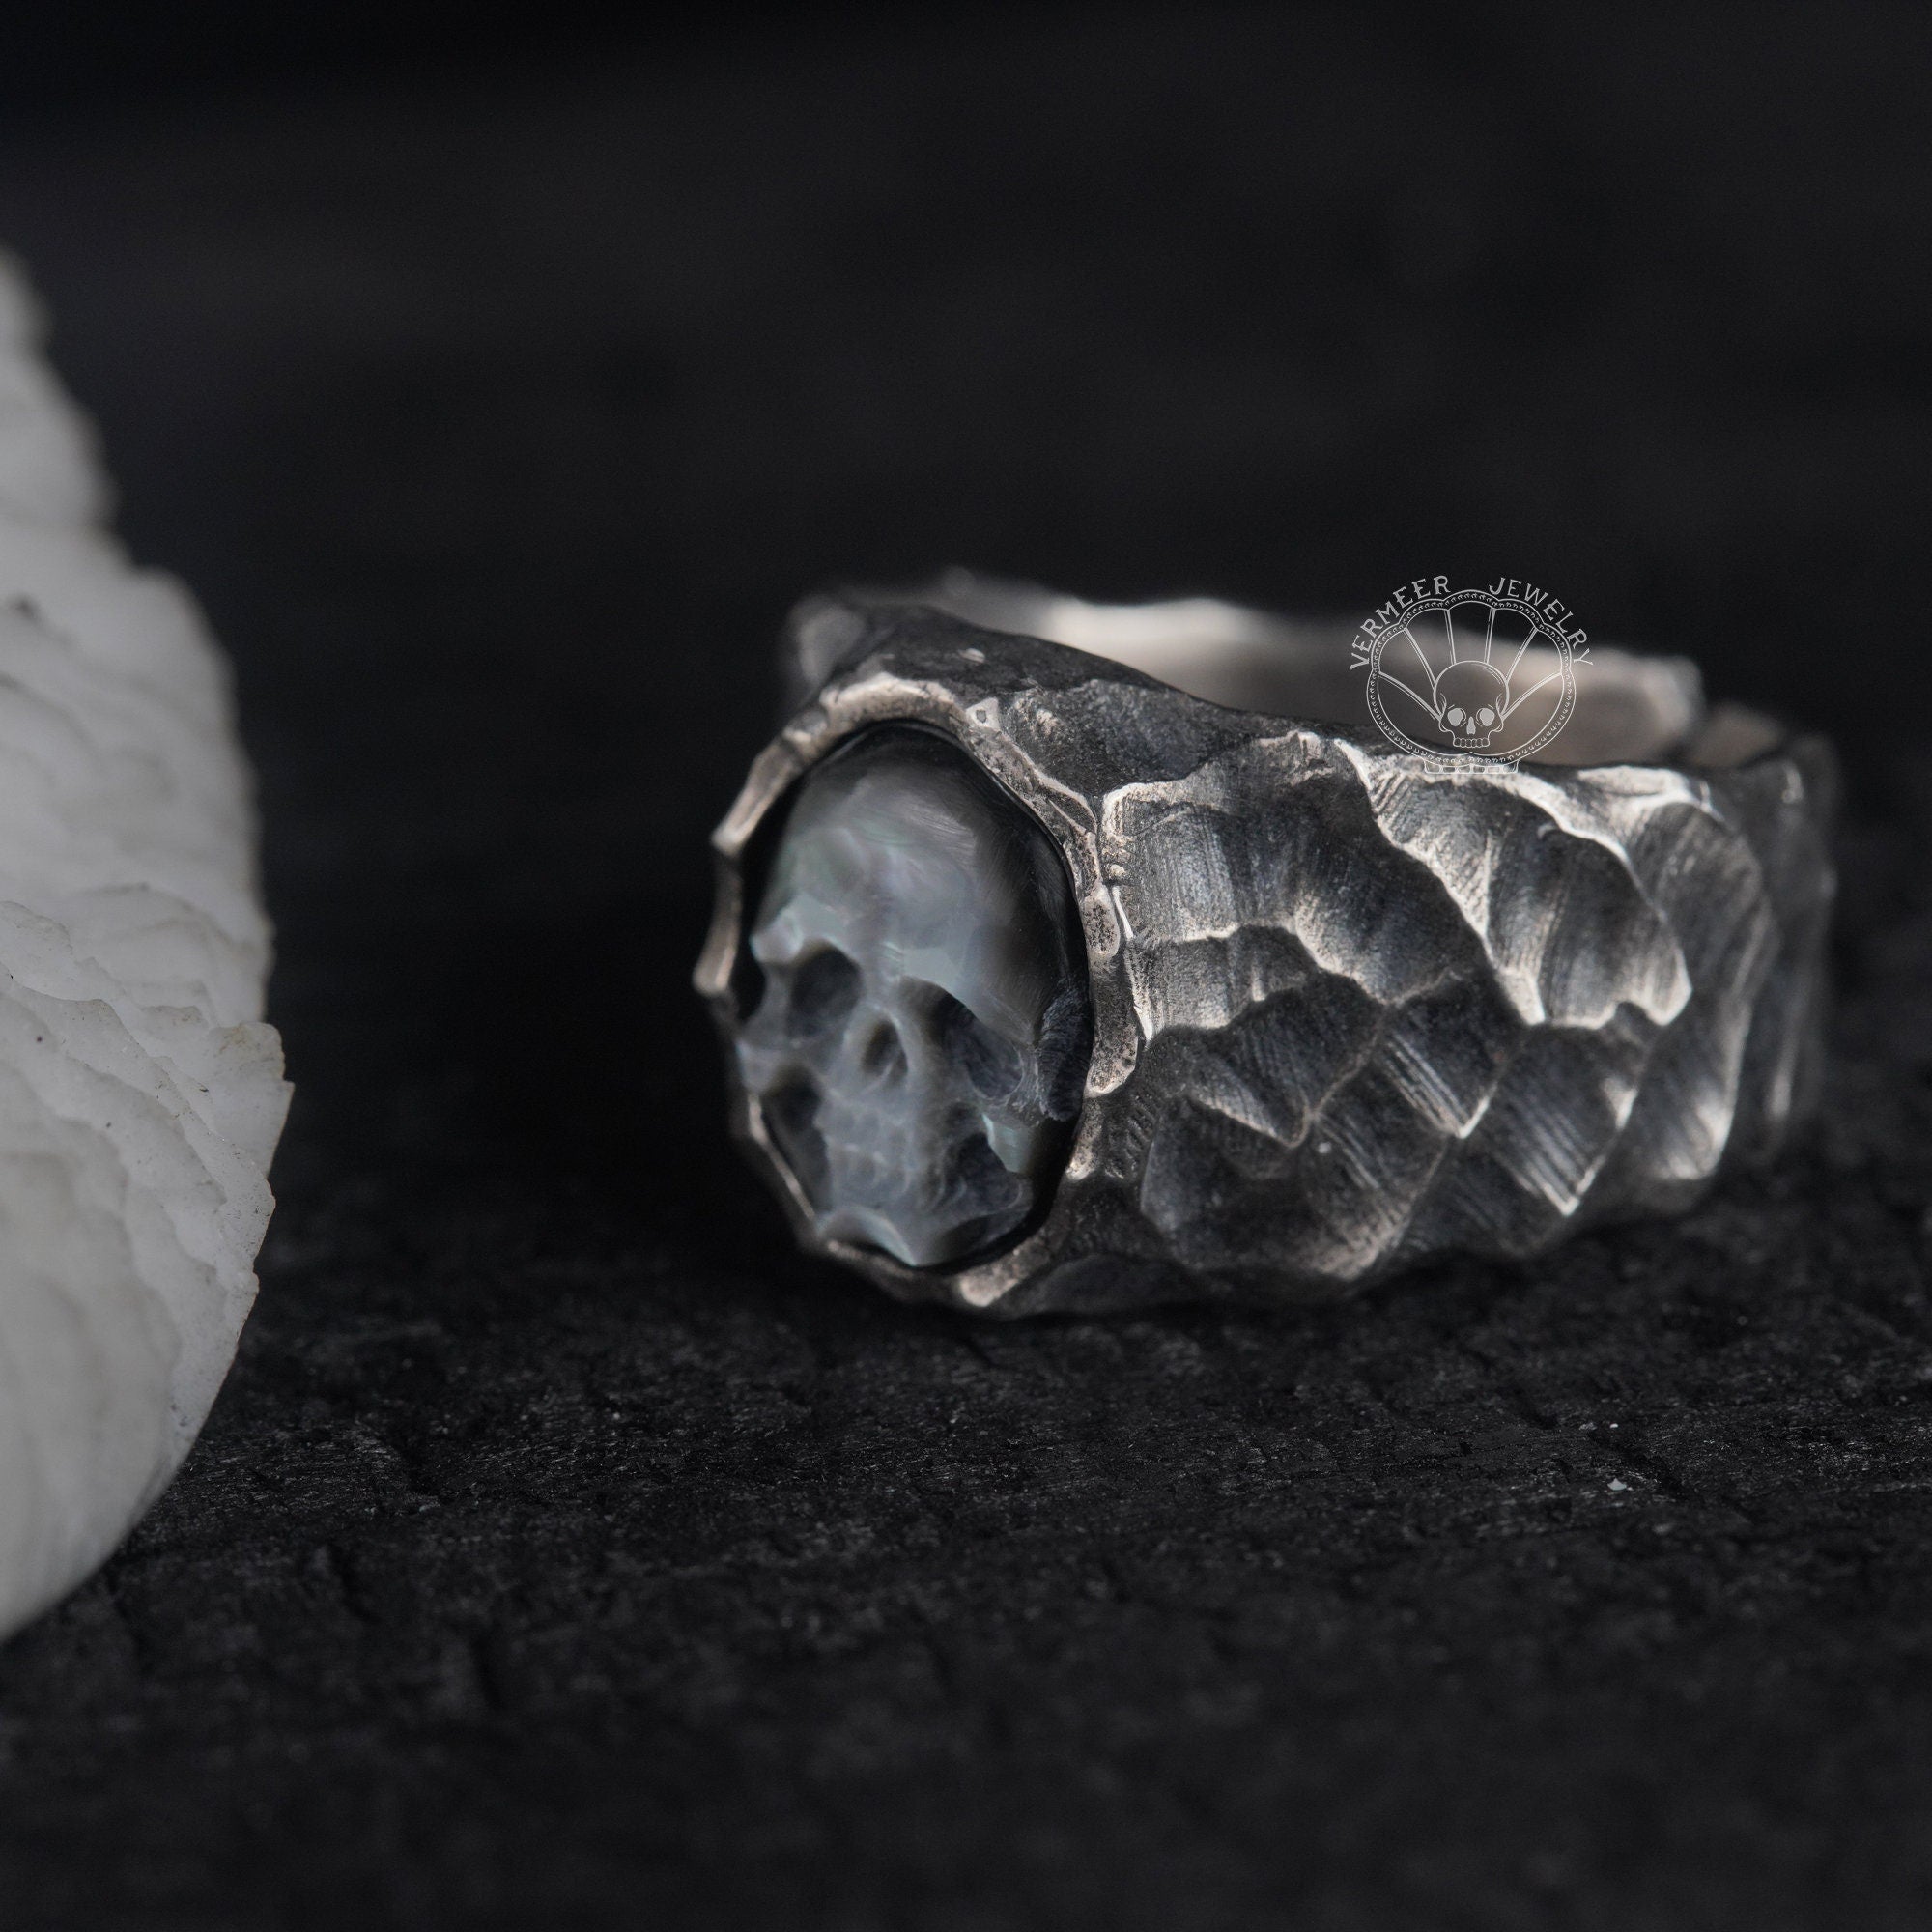 carved skull ring 925 Sterling Silver Men & Women Wedding Band Open Back Size Adjustable Matching Promise Rings Her Him